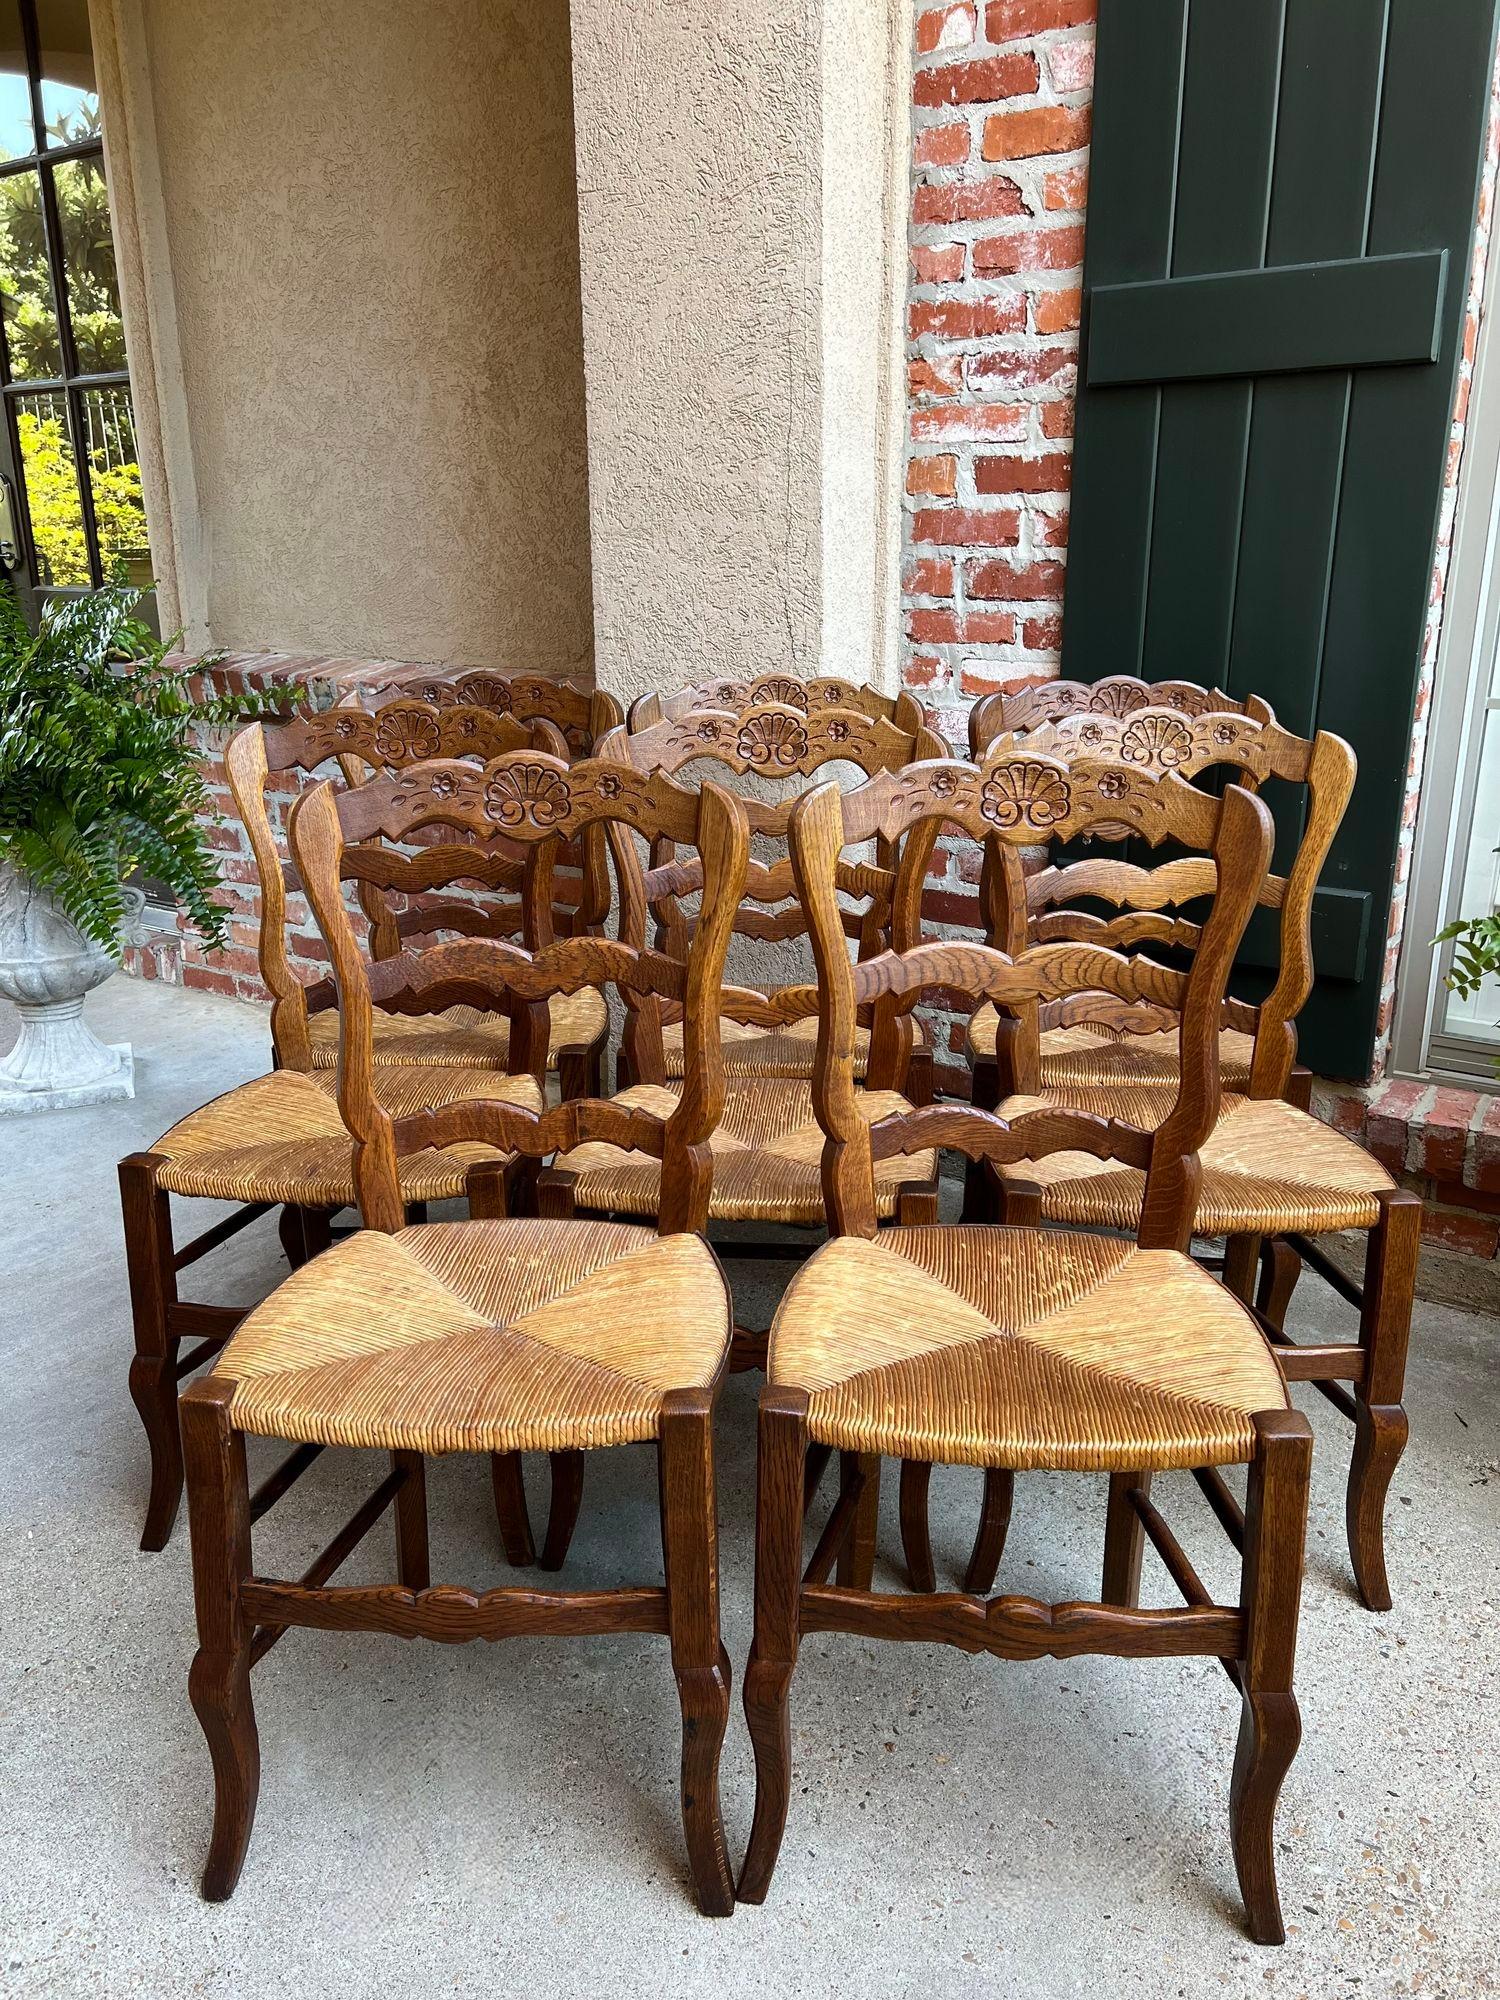 Set 8 Antique French Country Dining Chairs Carved Oak Rush Seat Ladder Back.

Direct from France, a great set of EIGHT antique French dining chairs, with classic French style…perfect for a kitchen OR dining room.
Serpentine ladder backs with a